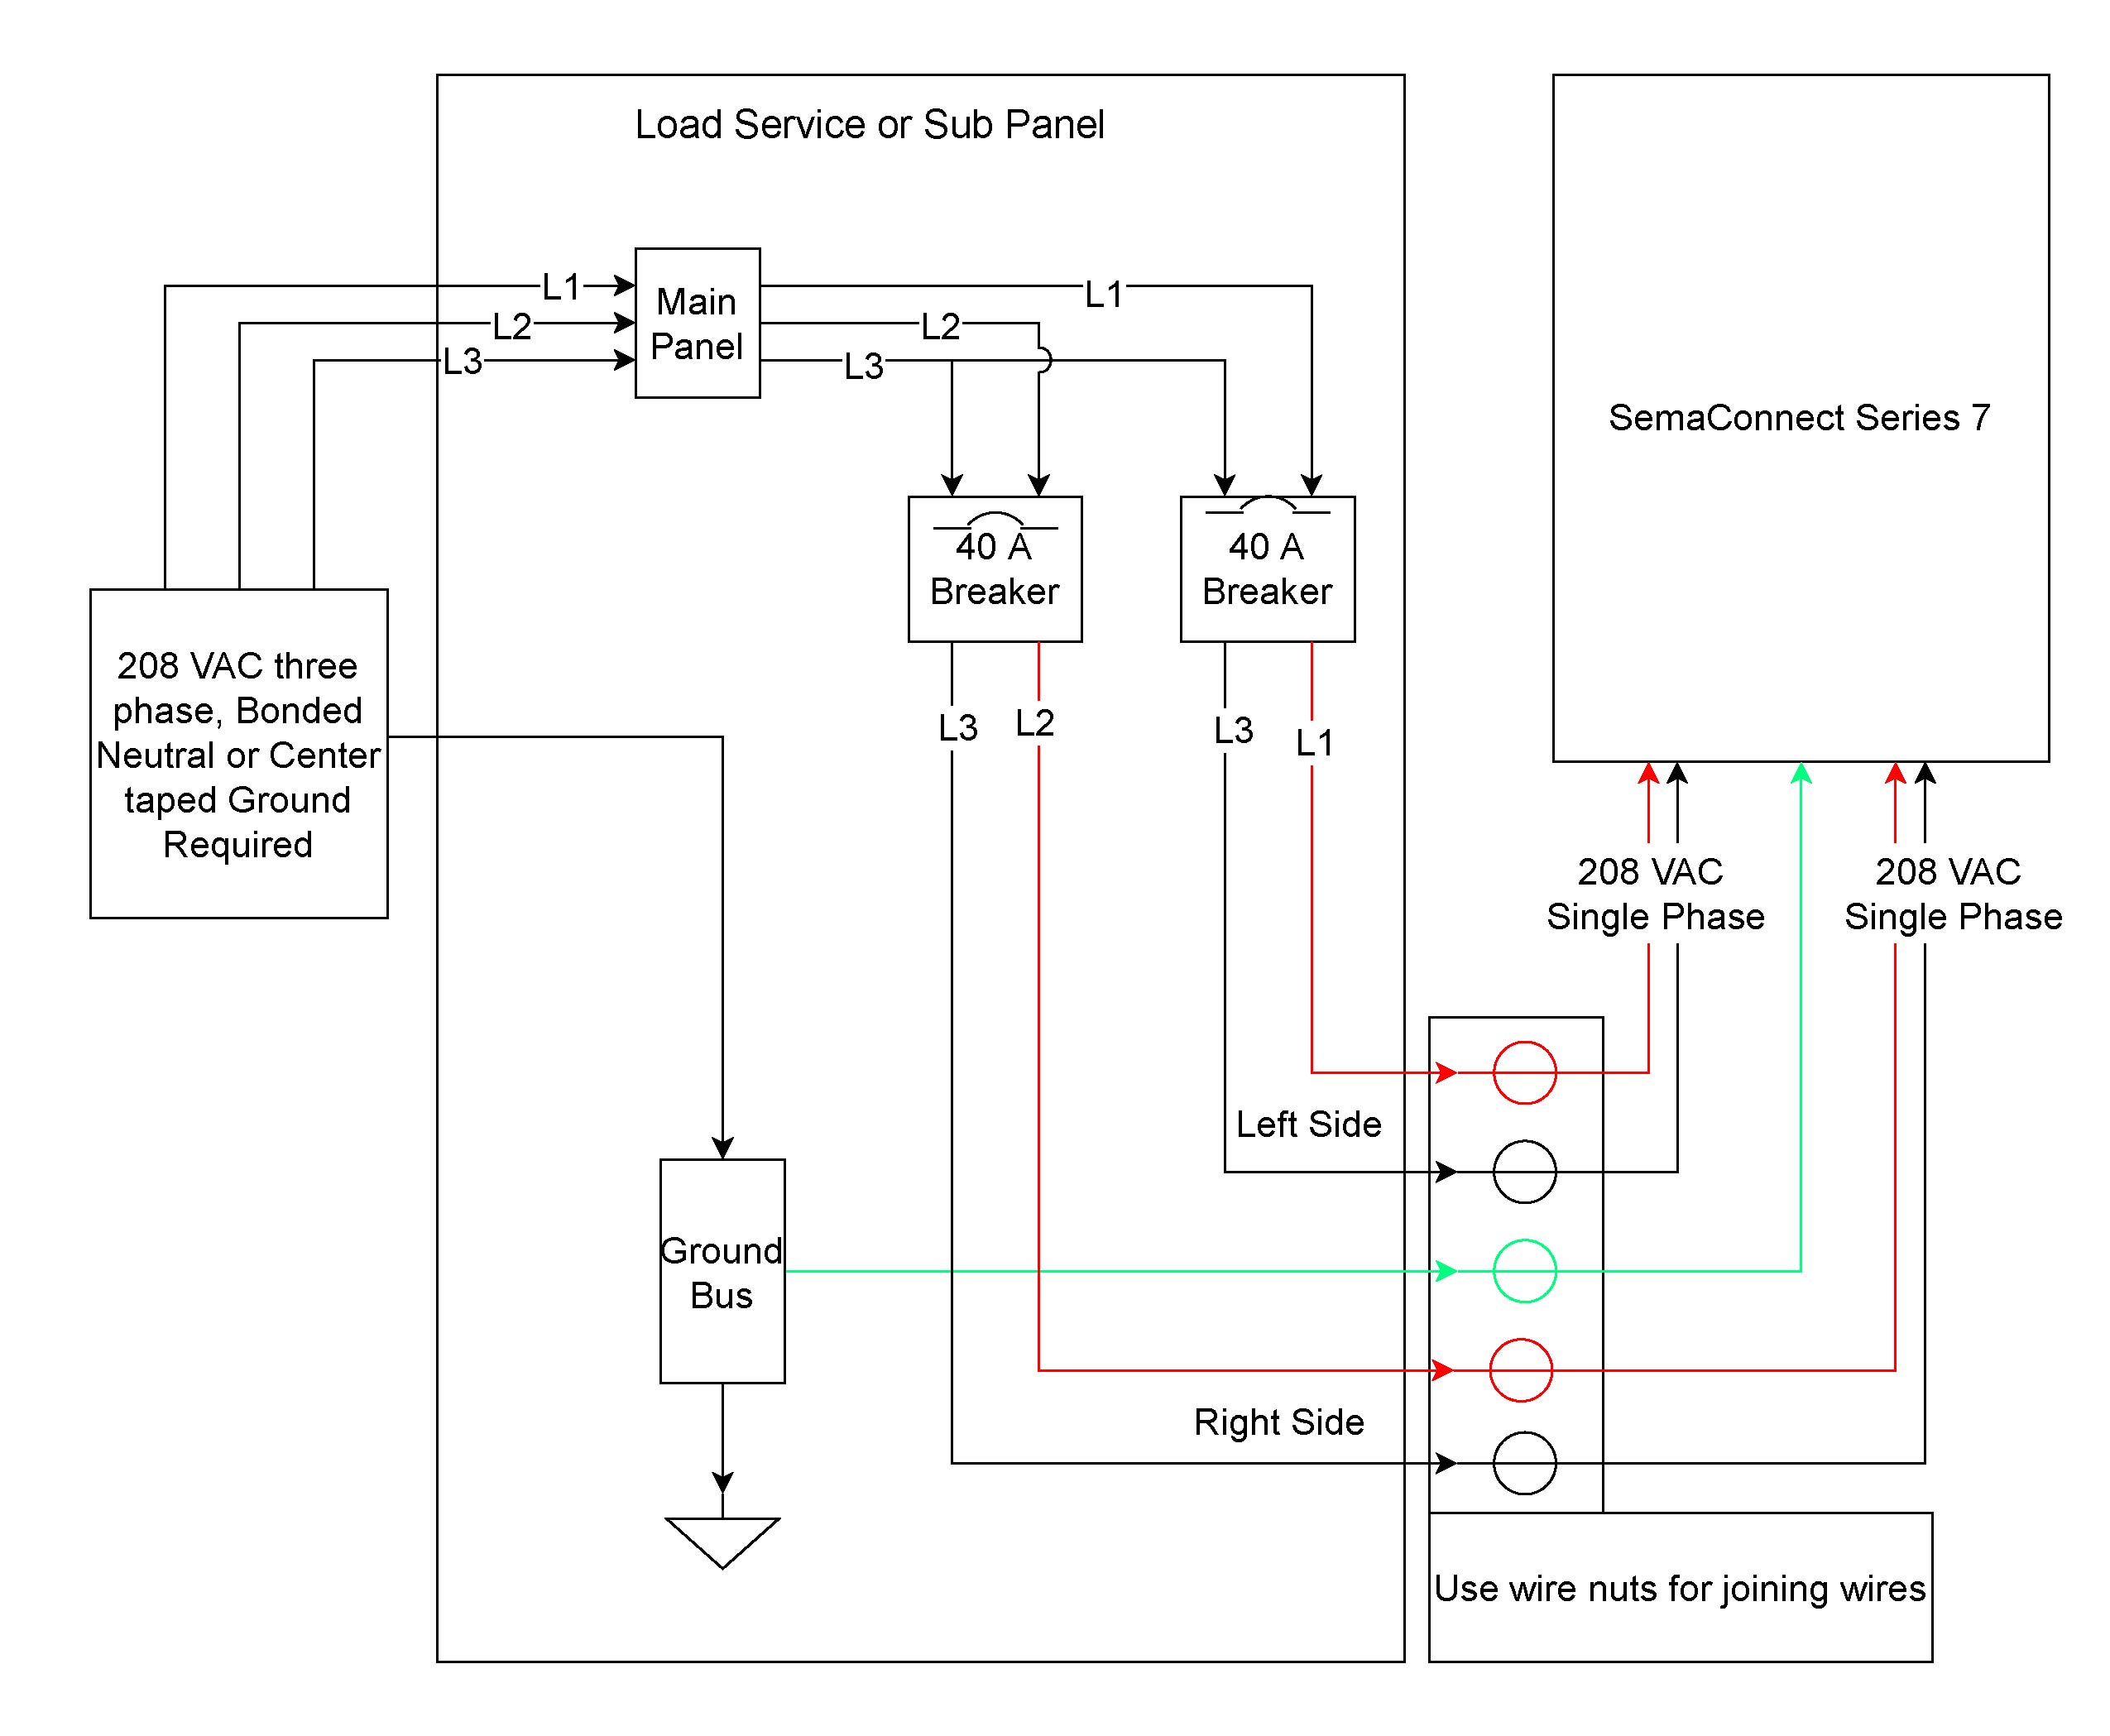 wiring diagram for a dometic penguin air conditioner